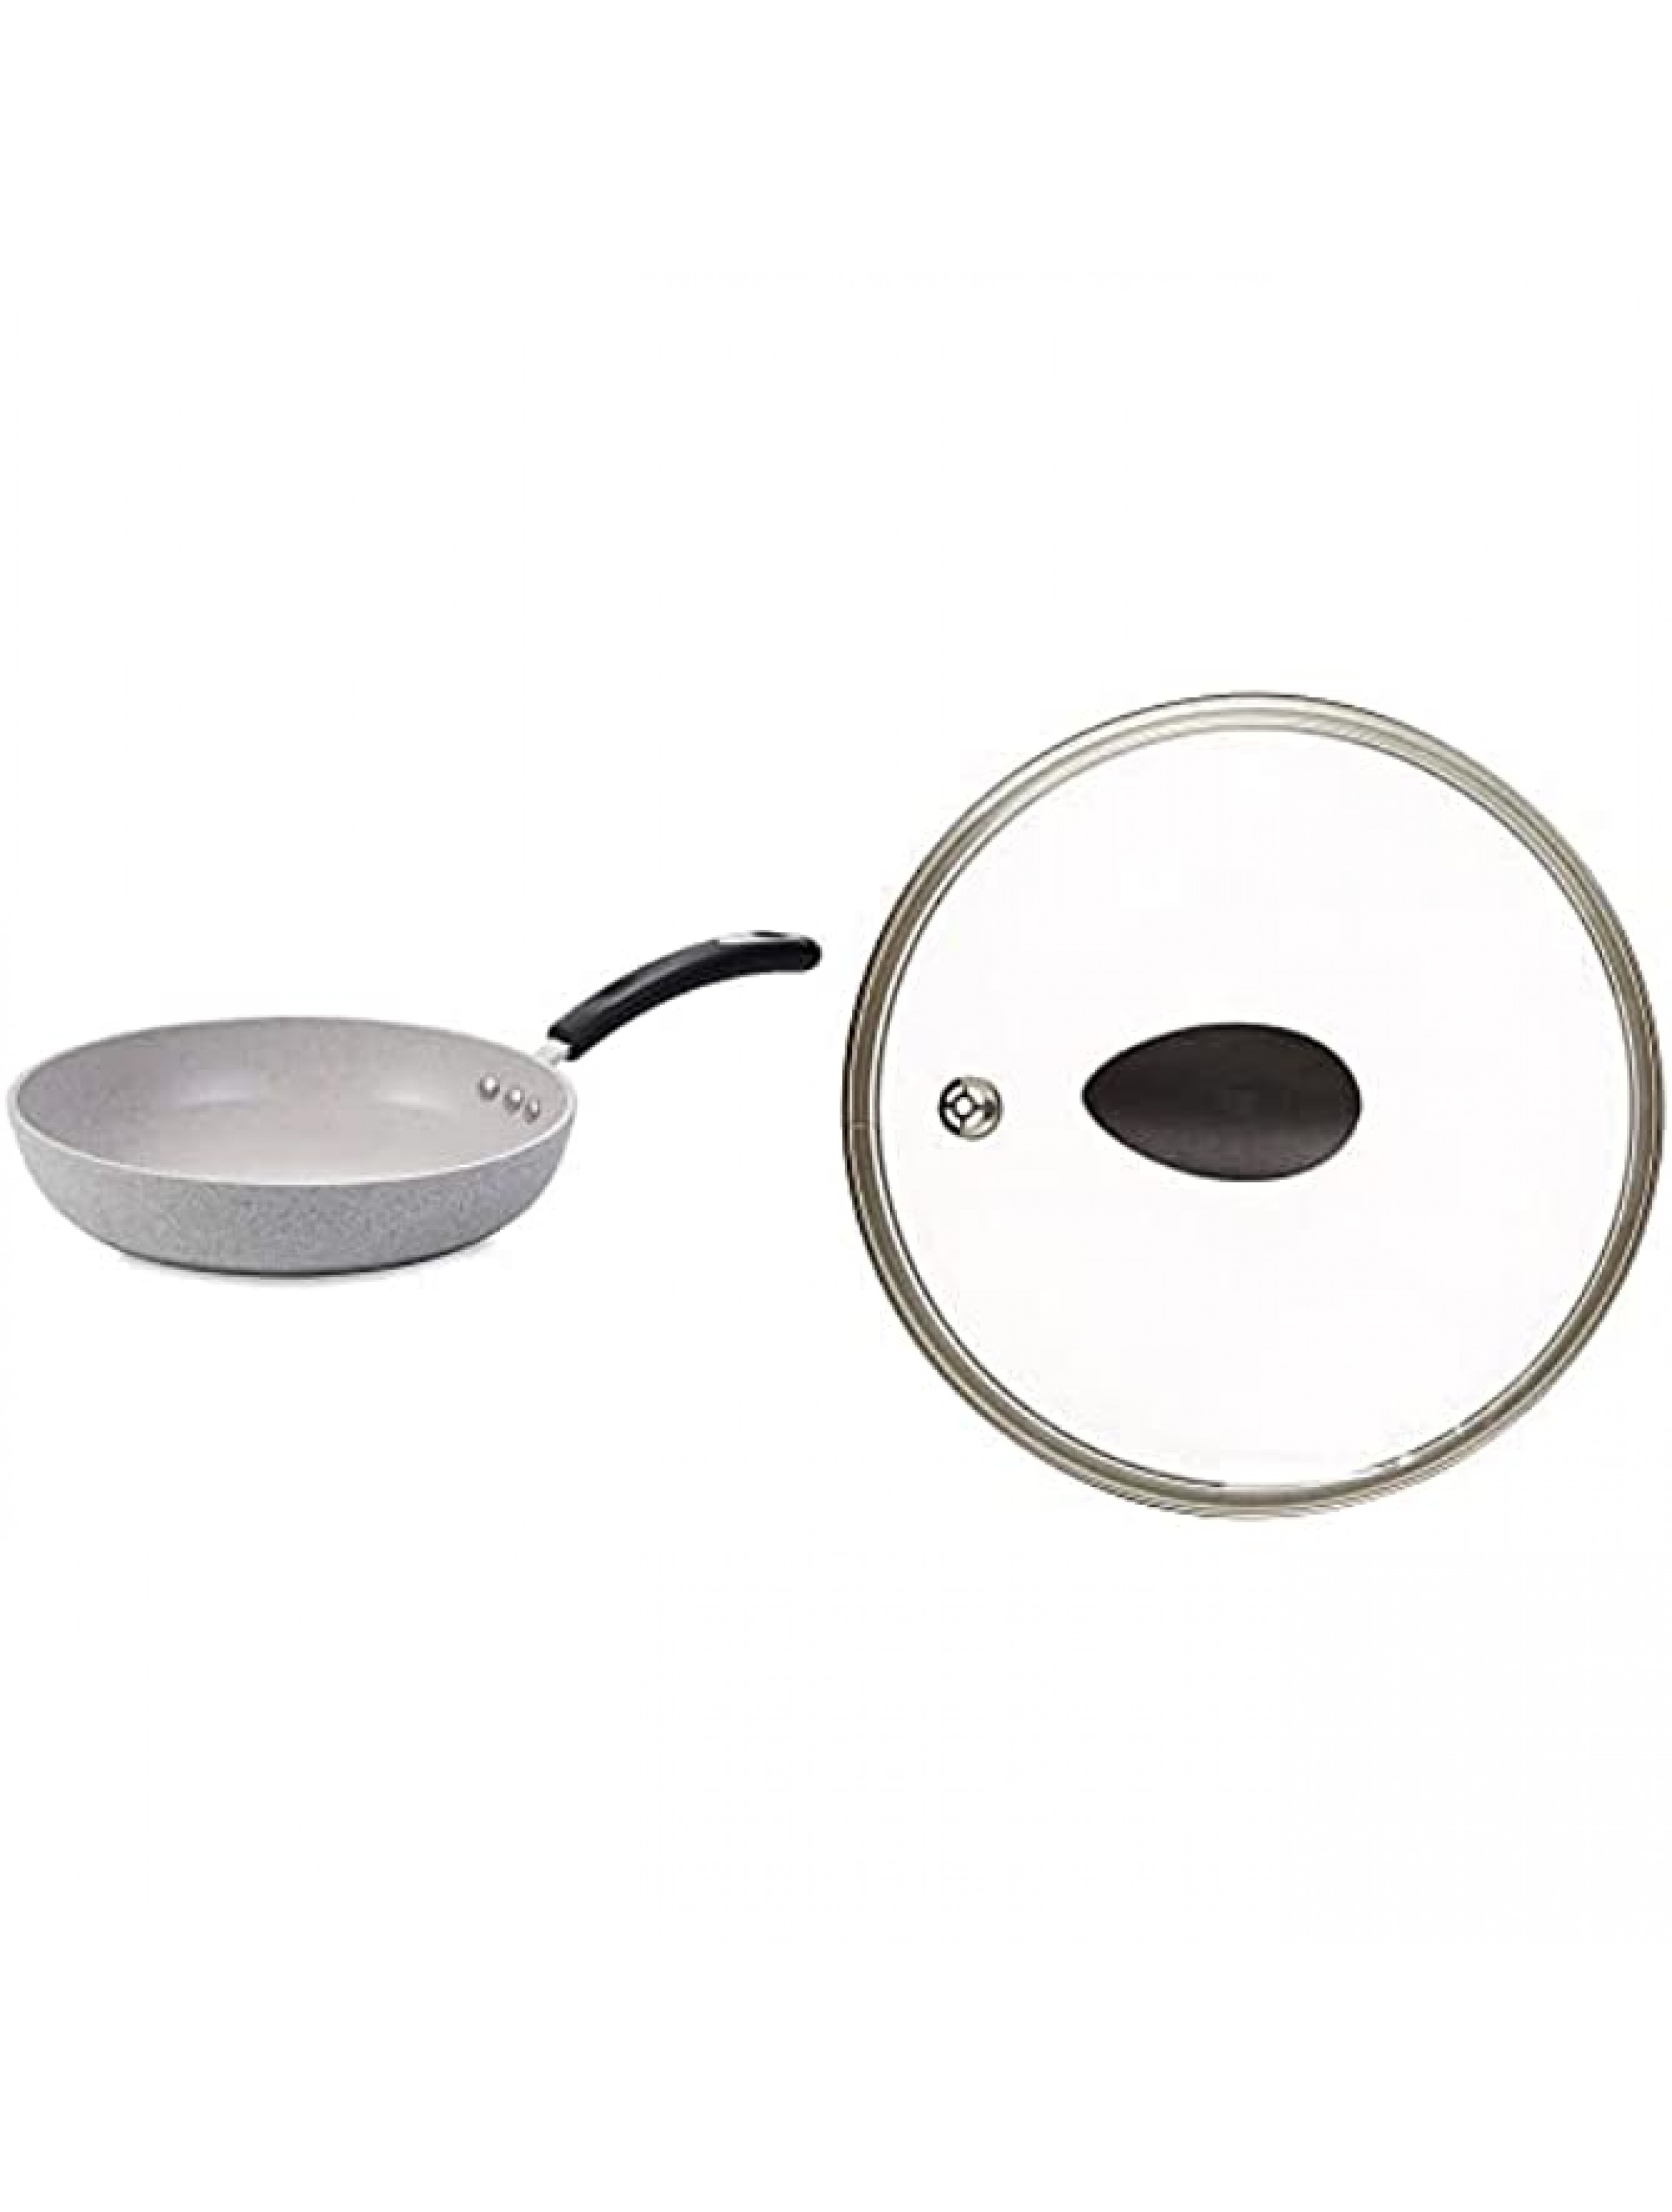 12 Stone Earth Frying Pan and Lid Set by Ozeri with 100% APEO & PFOA-Free Stone-Derived Non-Stick Coating from Germany - BJSIUNNWV